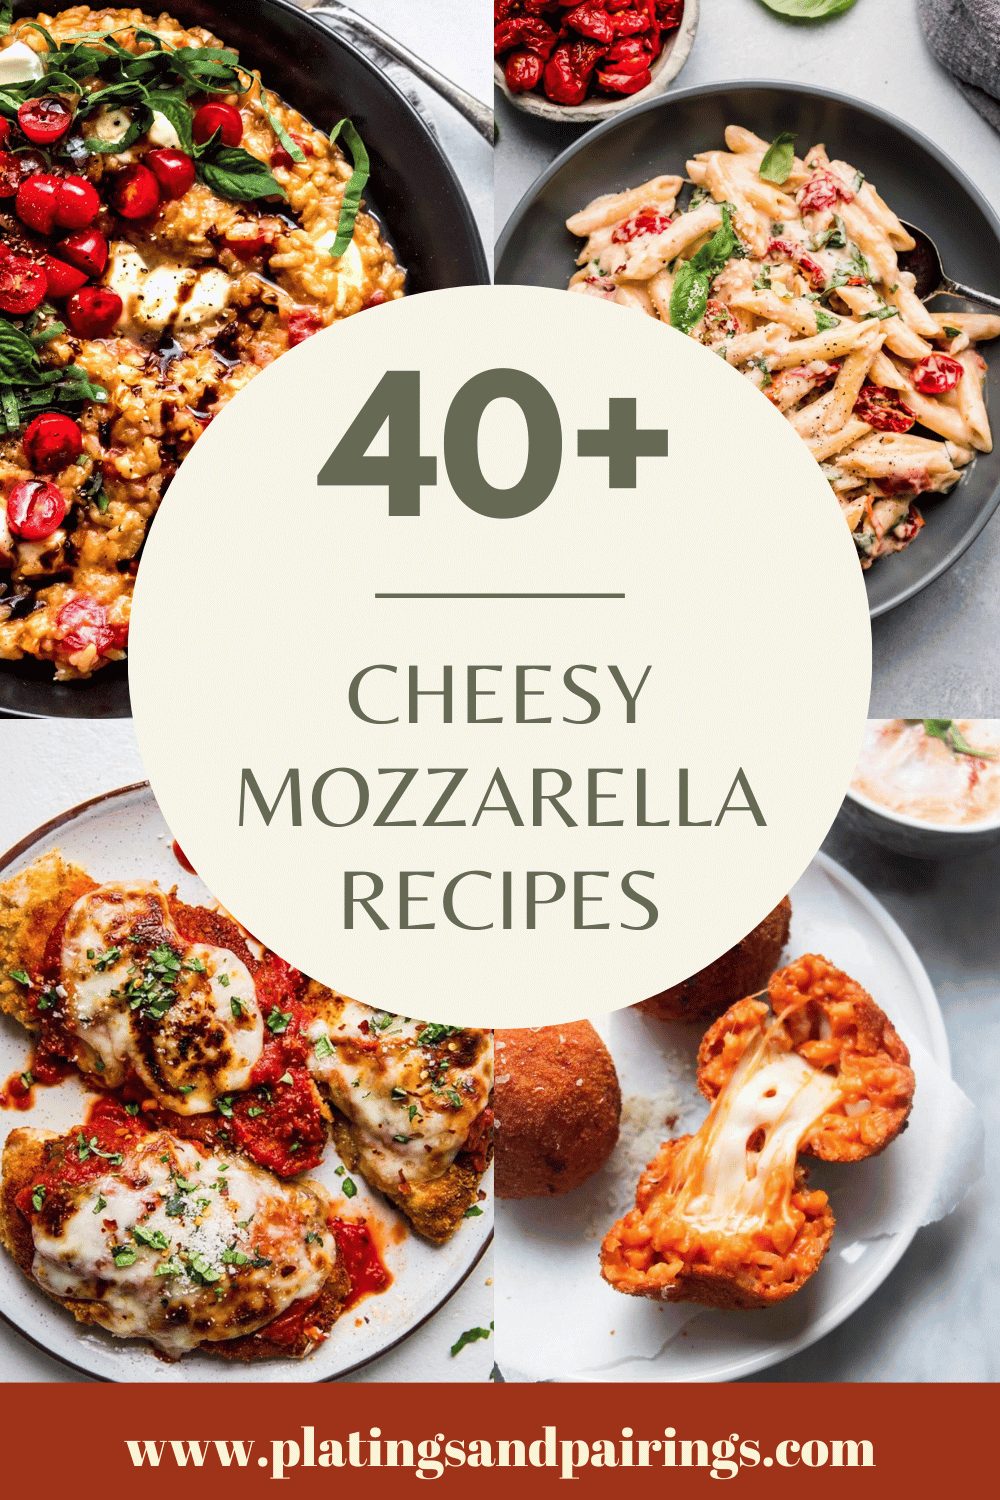 Collage of mozzarella recipes with text overlay.